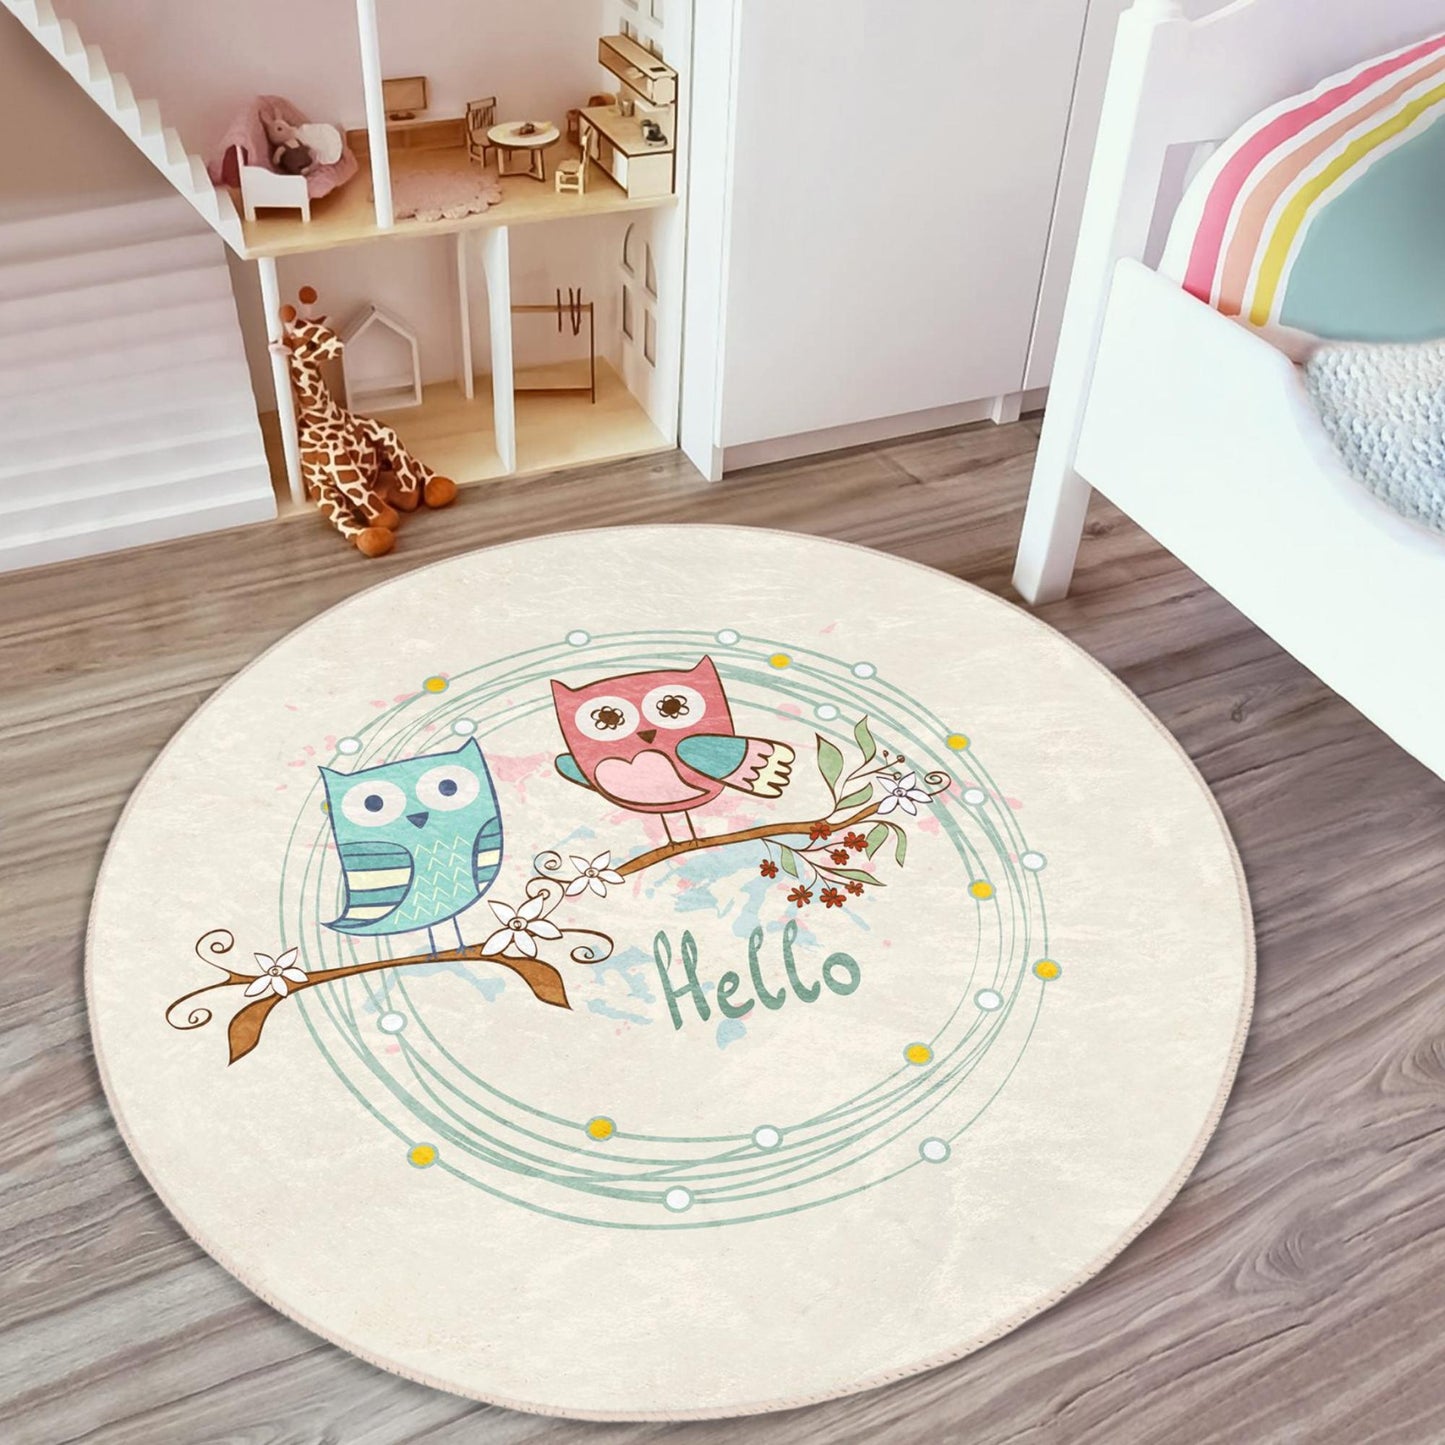 Charming kids rug adorned with sweet owls resting on the tree.